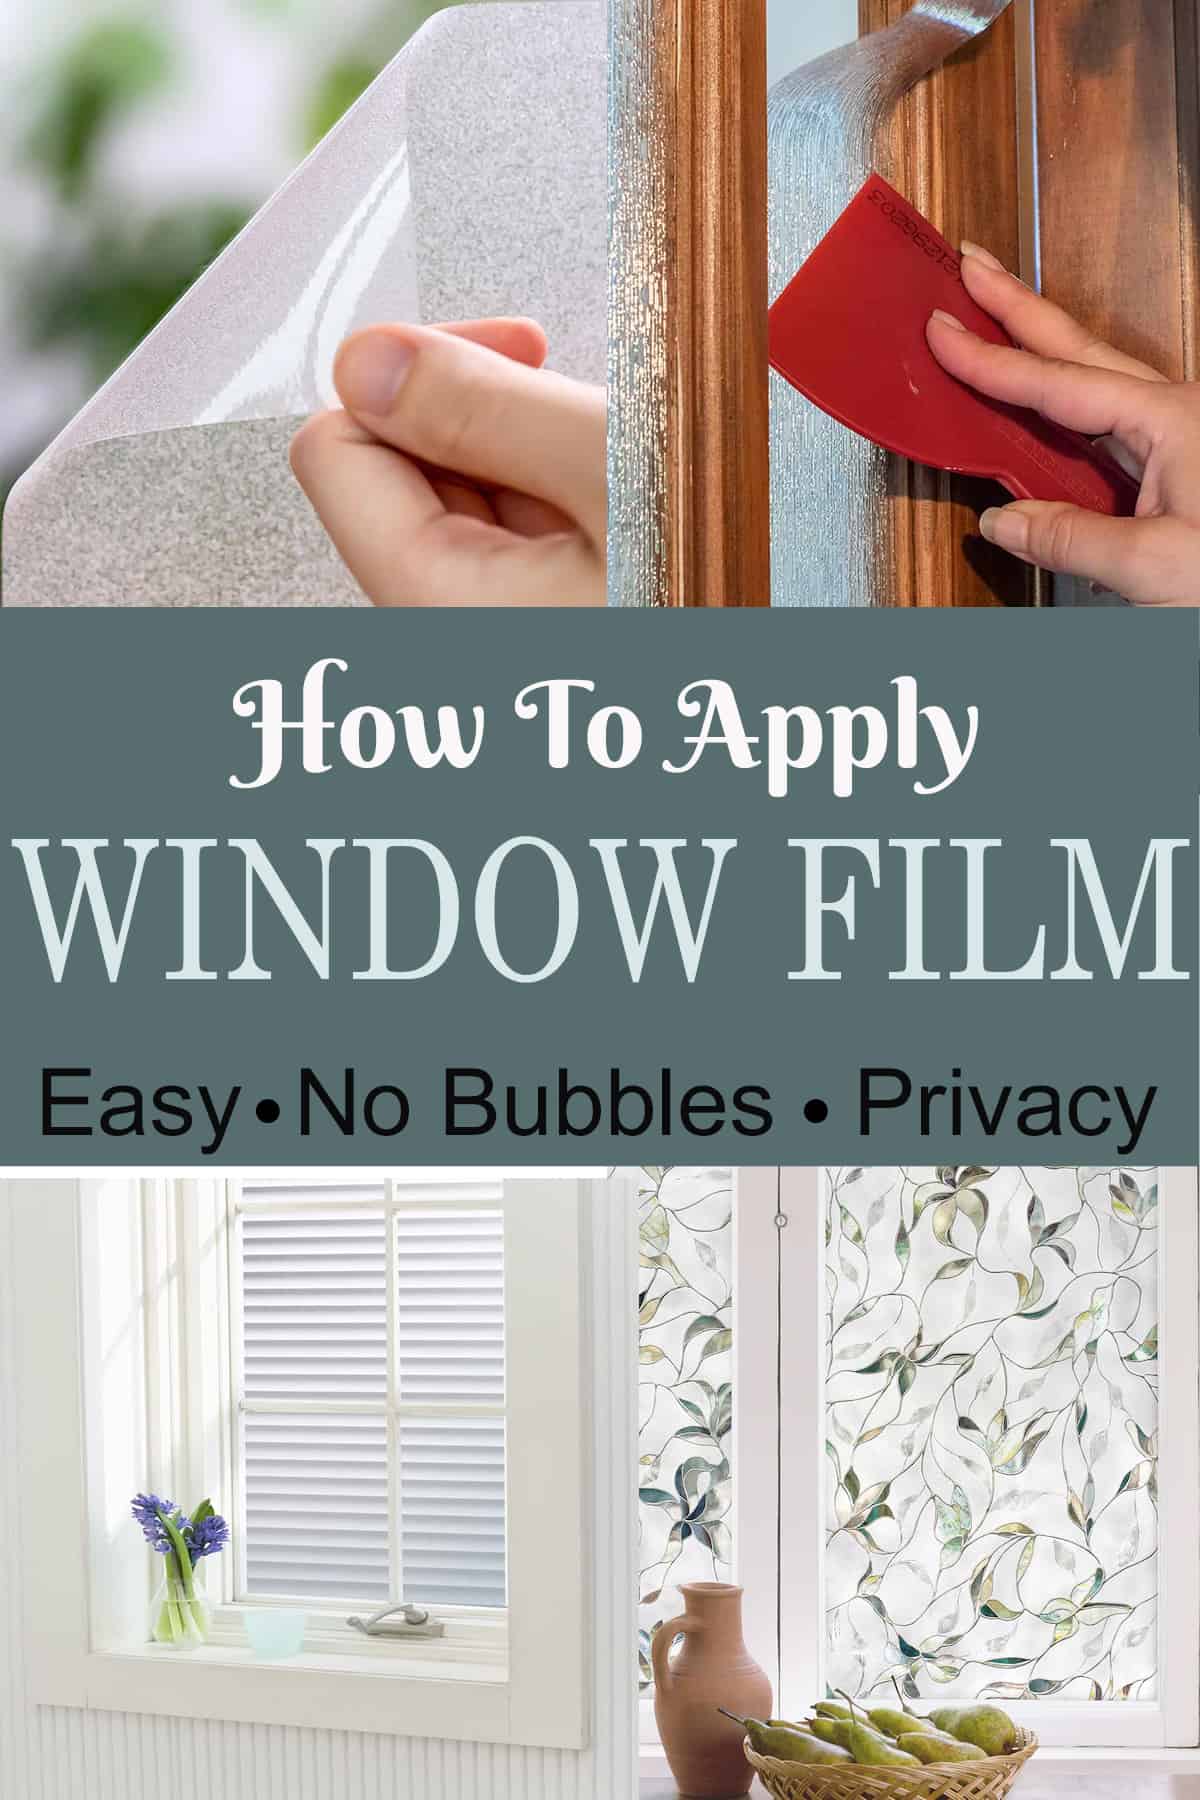 Collage of steps to applying window film.